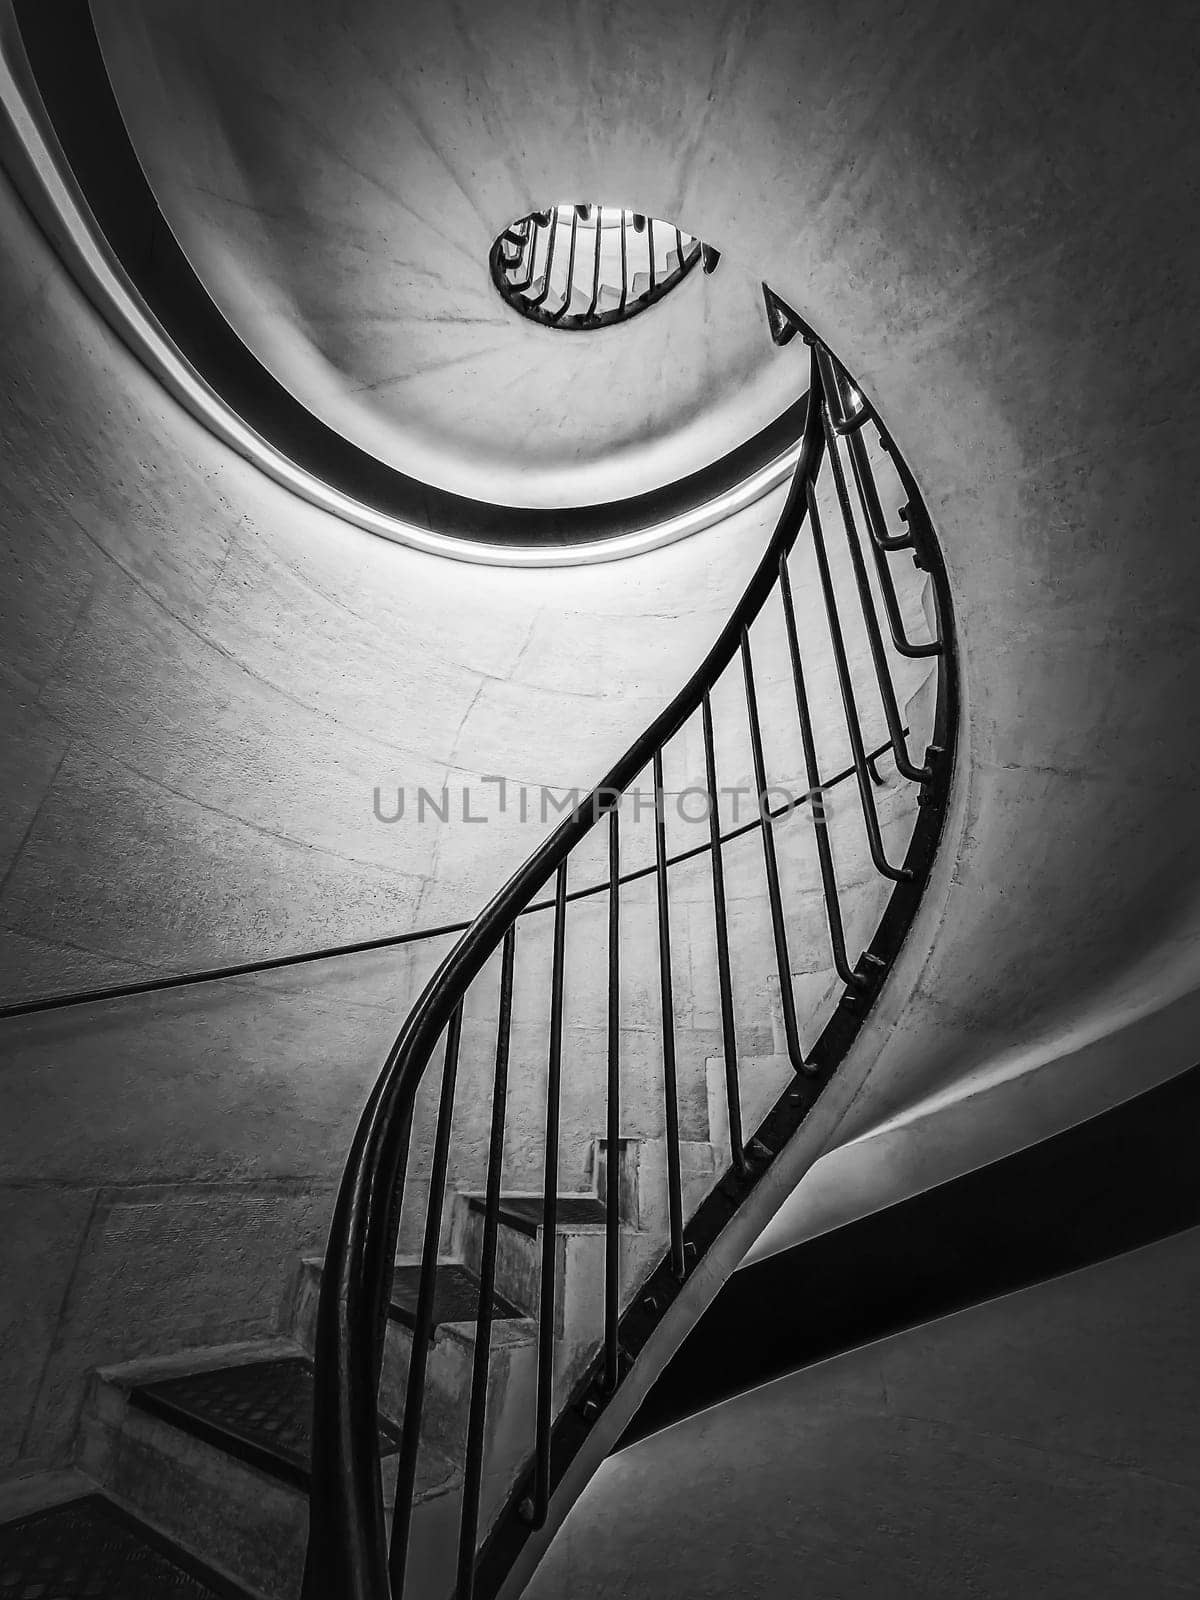 Black and white abstract view of a stairwell with metal handrail. Spiral stairway, hypnotic form by psychoshadow